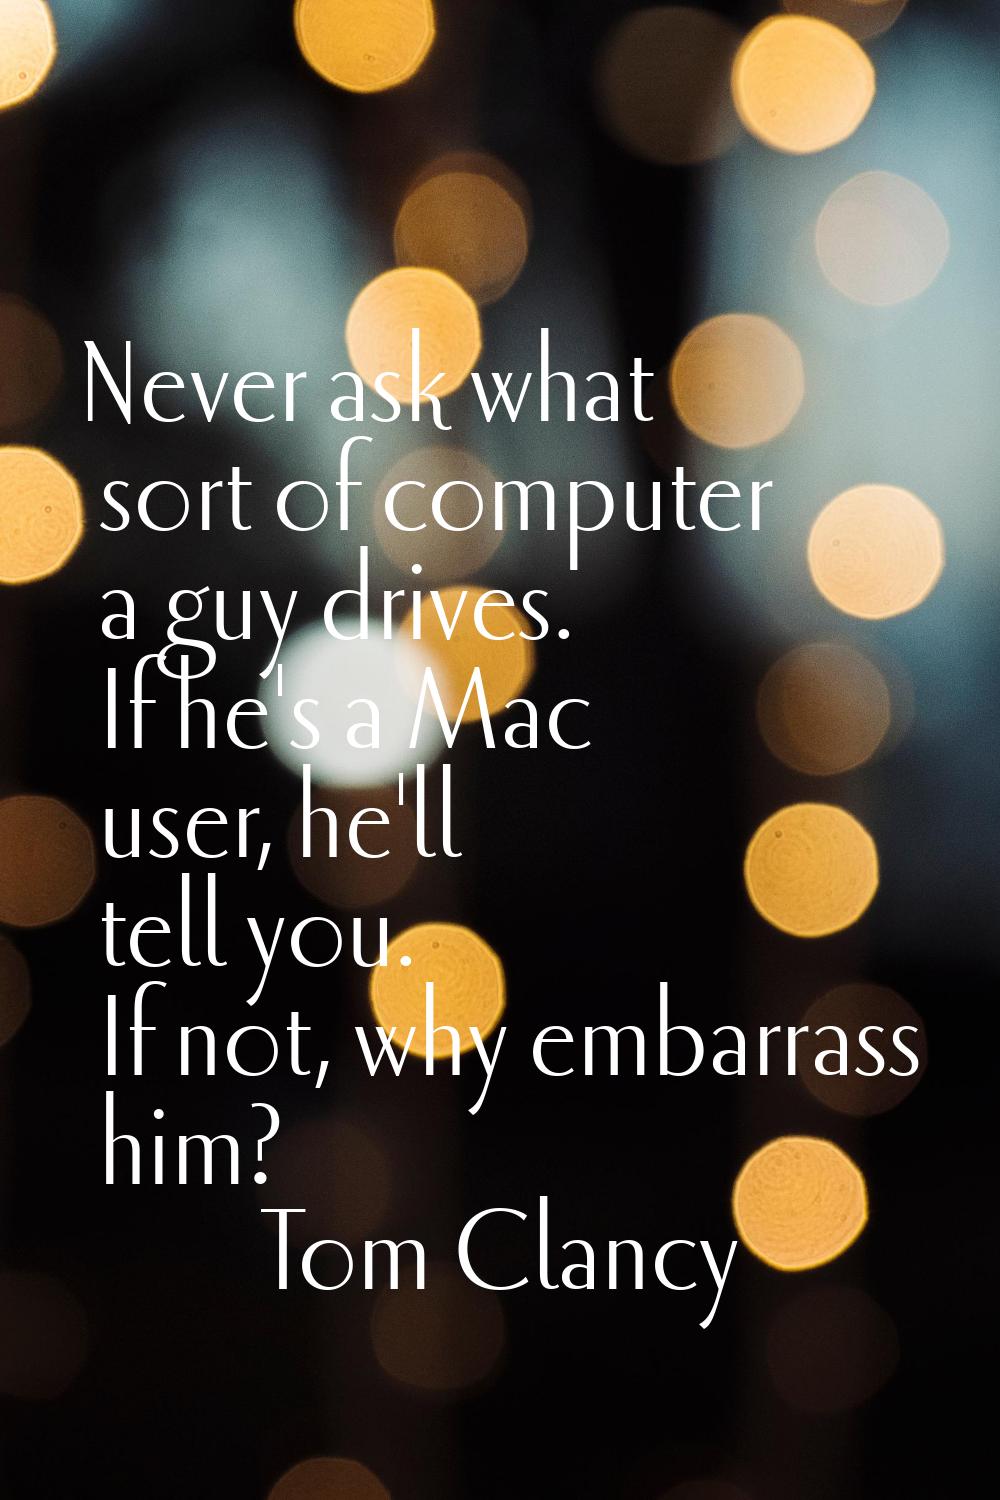 Never ask what sort of computer a guy drives. If he's a Mac user, he'll tell you. If not, why embar